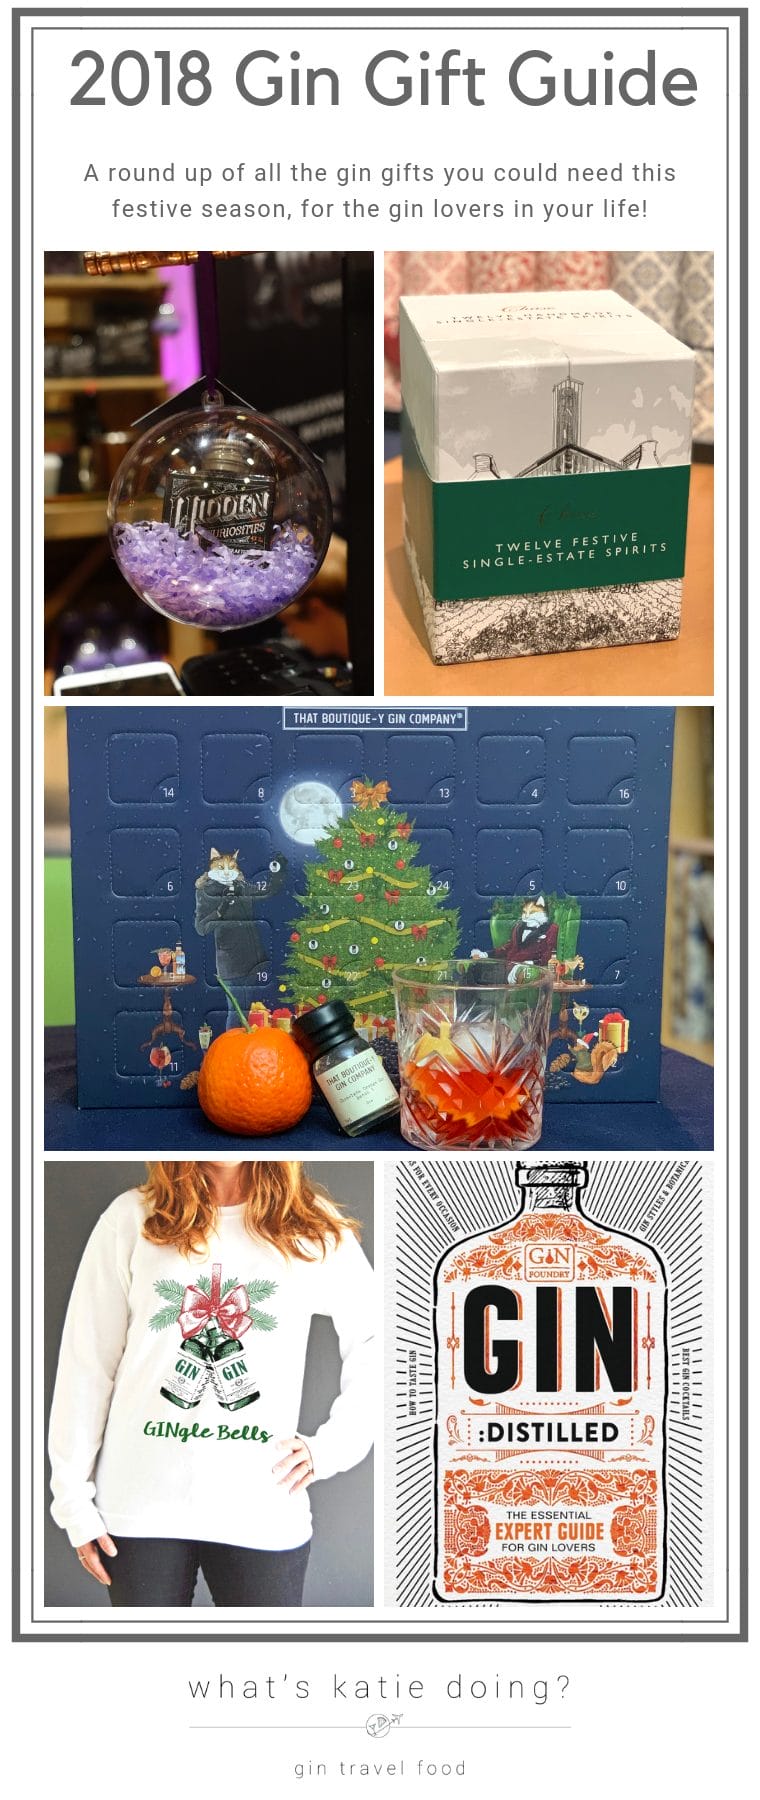 2018 Gin Gift Guide on What's Katie Doing? blog - a complete round up of everything gin!